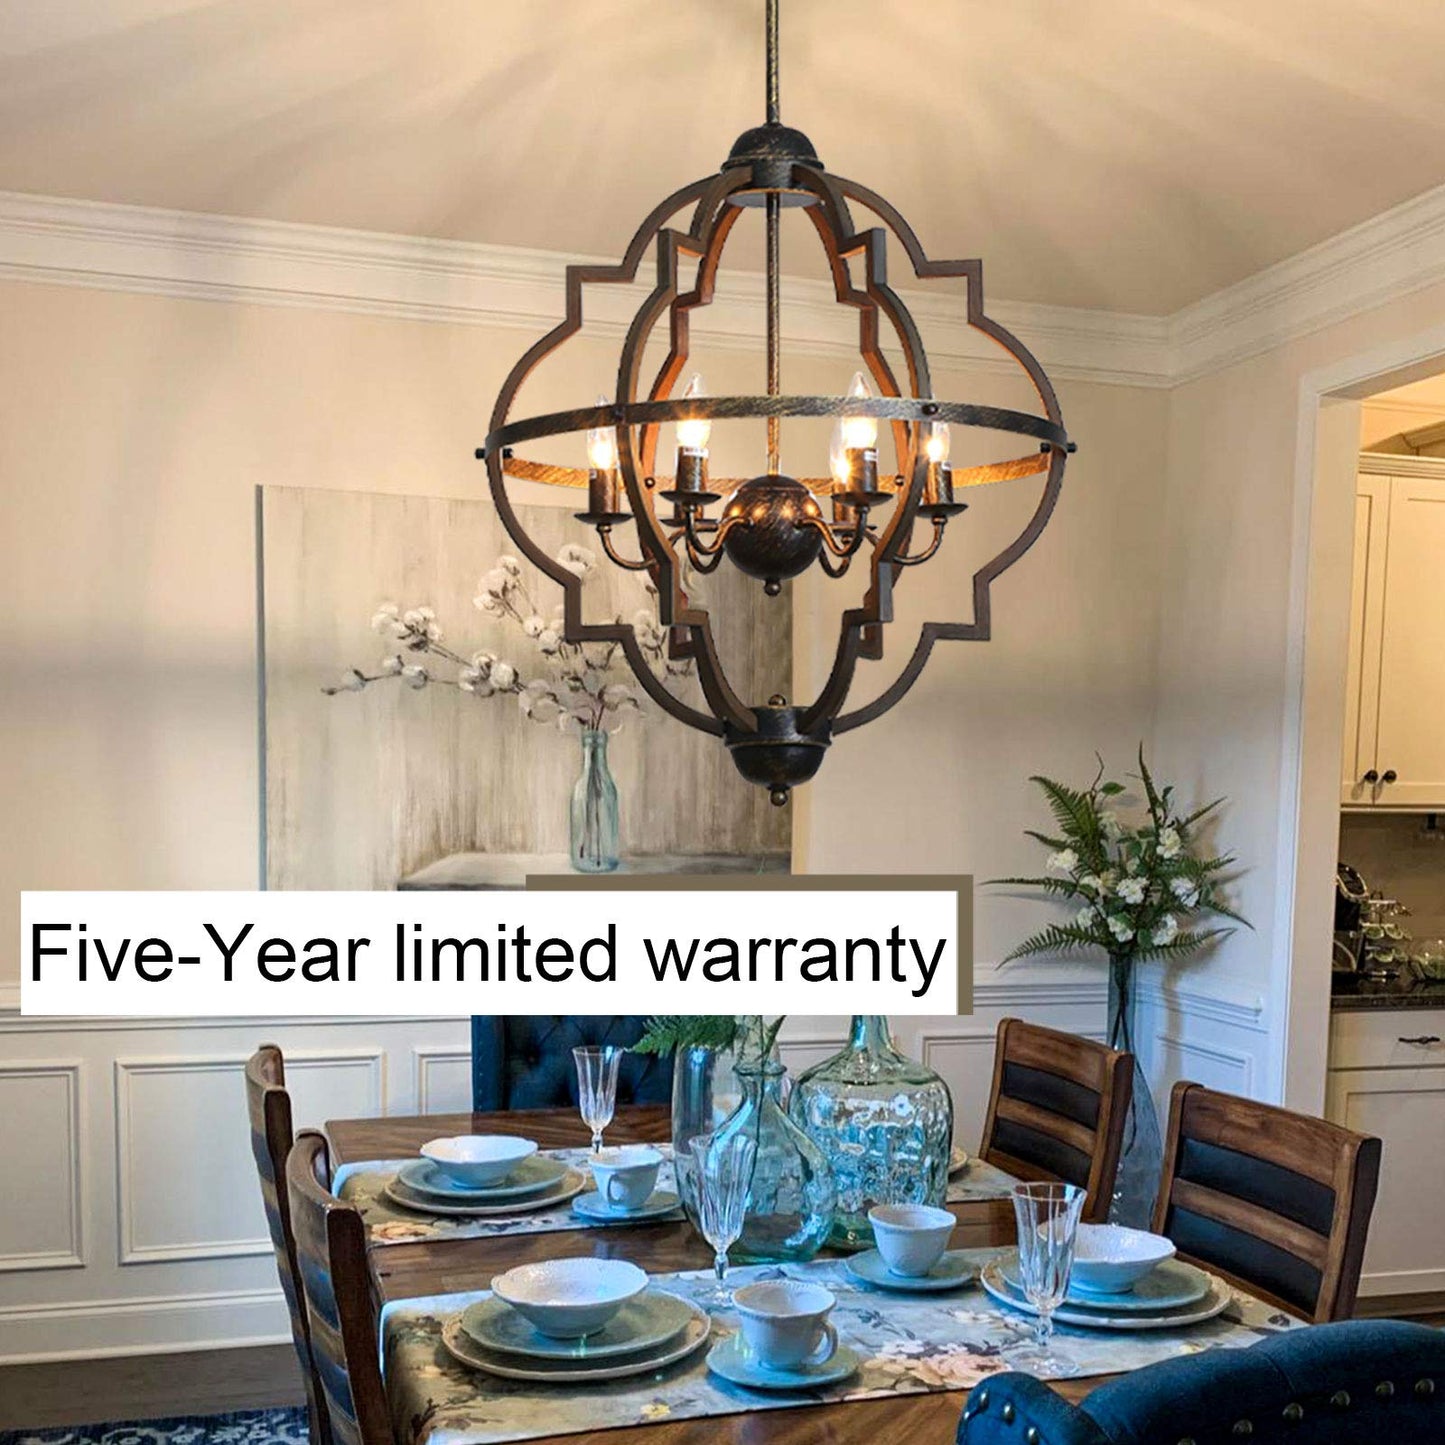 Bsyormak 6-Light Rustic Chandelier Farmhouse Pendant Lighting 22" Large E12 Adjustable Height Stardust Hanging Light Wood Color Painted Globe Vintage Dining Light for Kitchen Island Foyer Entryway